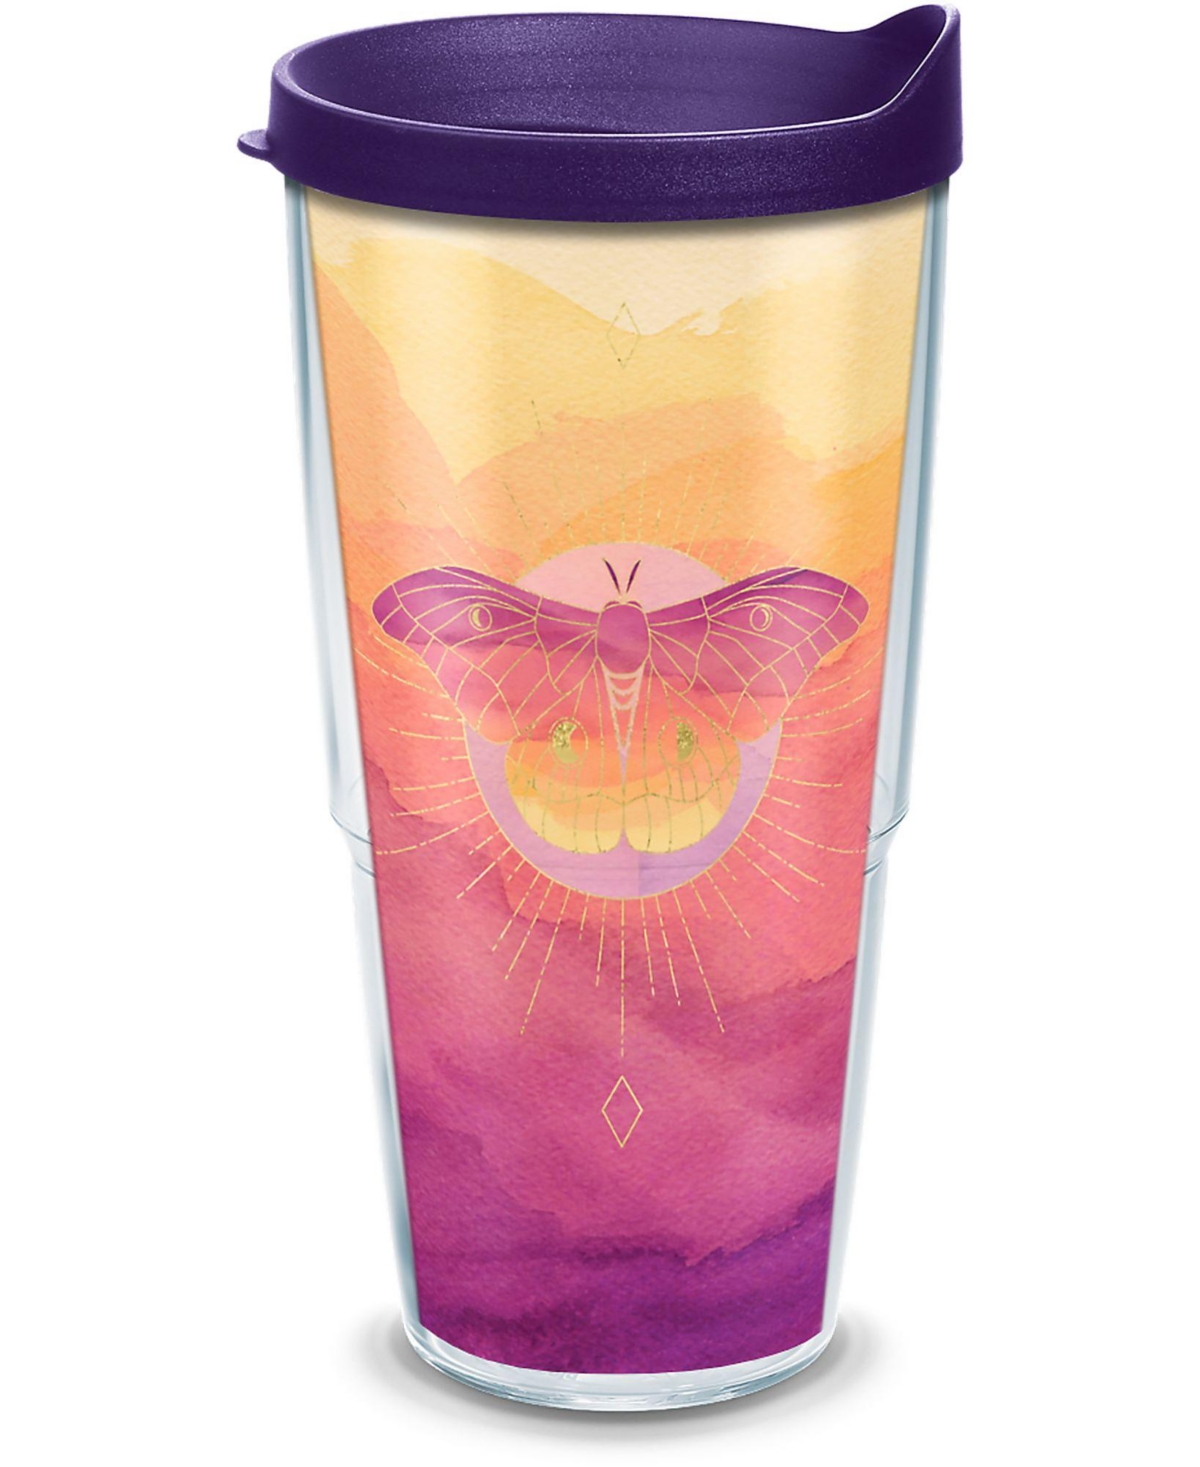 Tervis Tumbler Tervis Moth Made In Usa Double Walled Insulated Tumbler Travel Cup Keeps Drinks Cold & Hot, 24oz, Cl In Open Miscellaneous